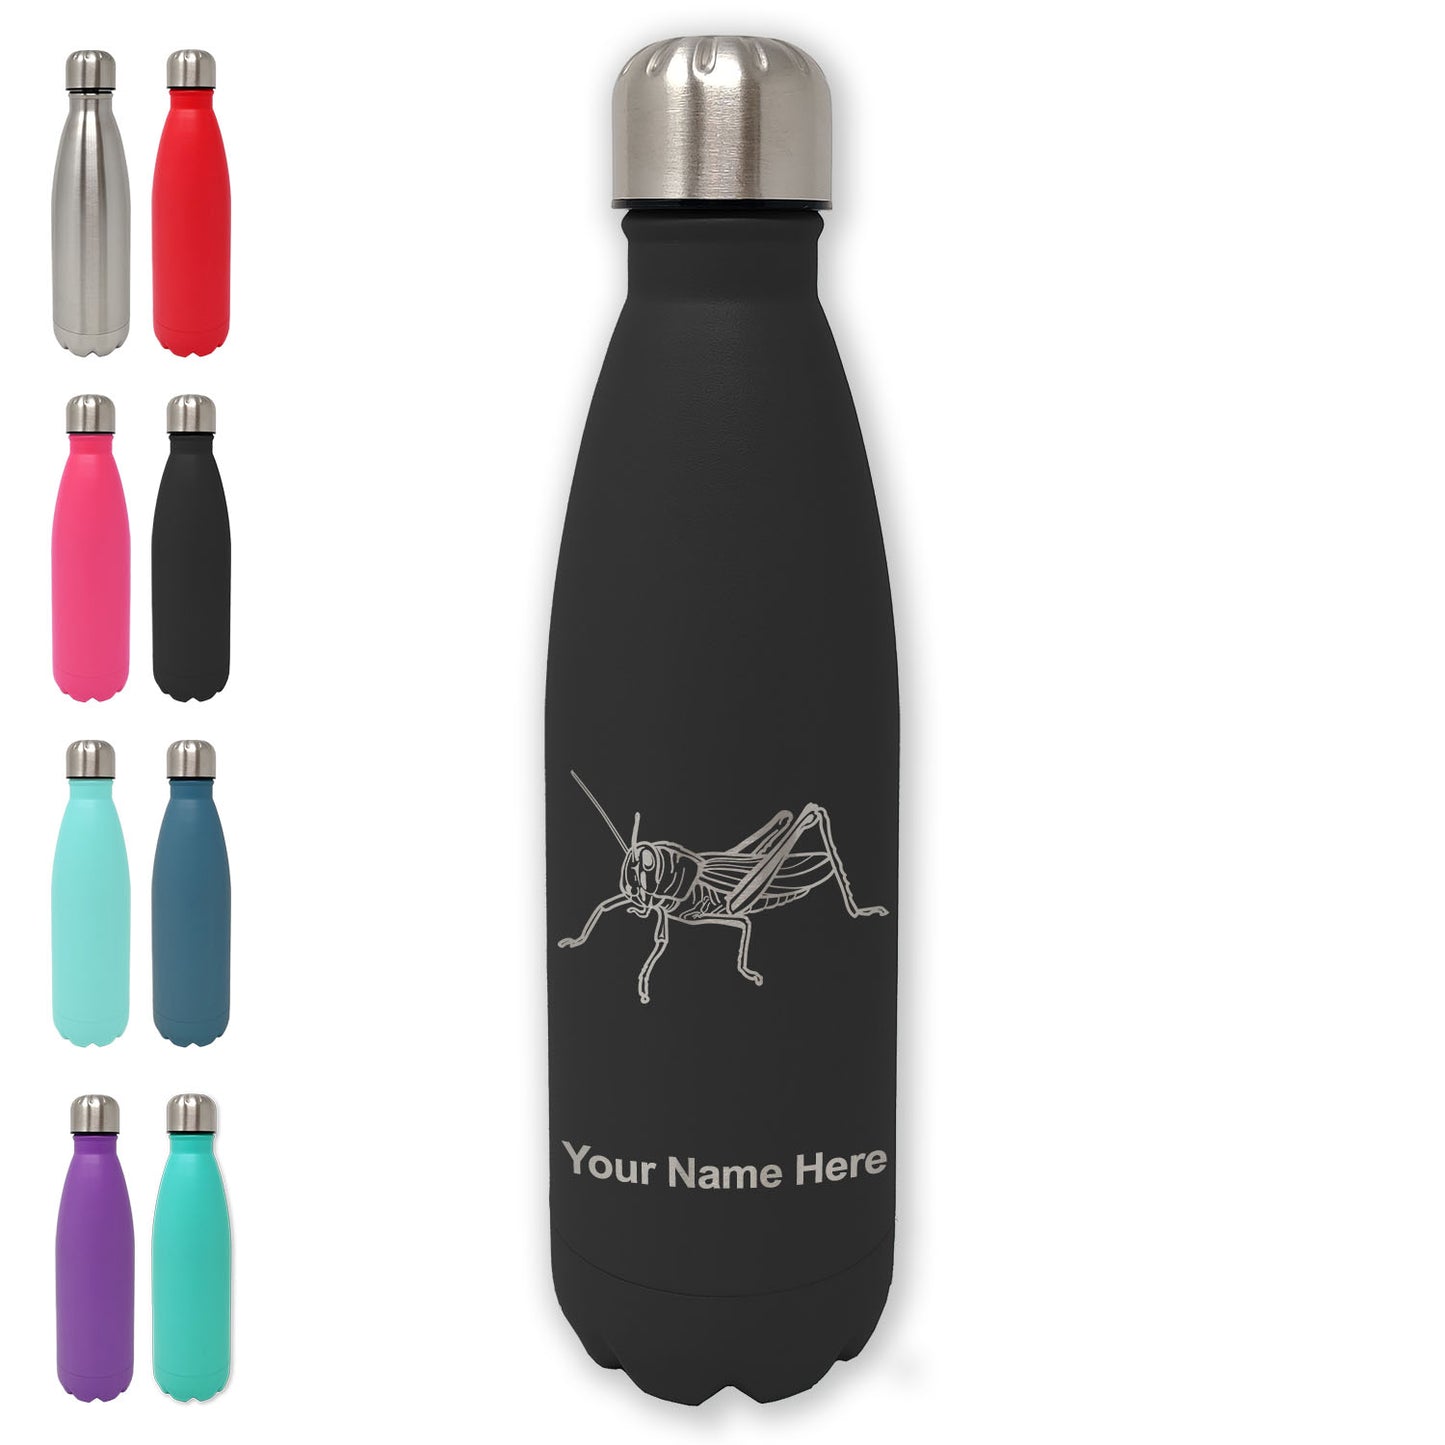 LaserGram Double Wall Water Bottle, Grasshopper, Personalized Engraving Included